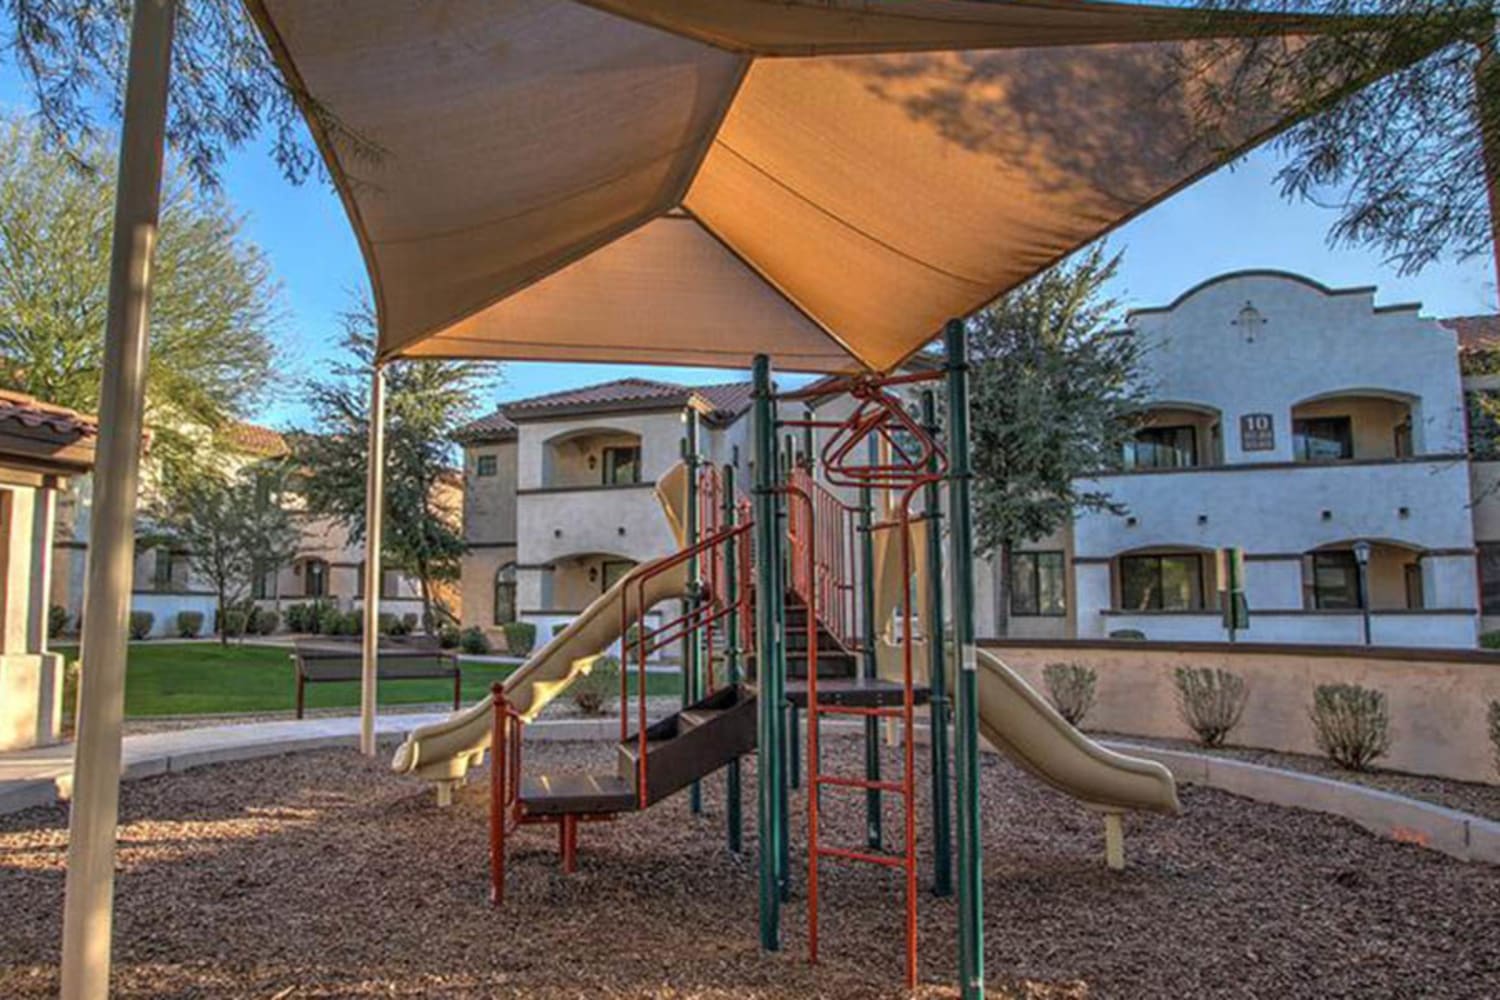 Enjoy having a playground on the grounds at Dobson 2222 in Chandler, Arizona